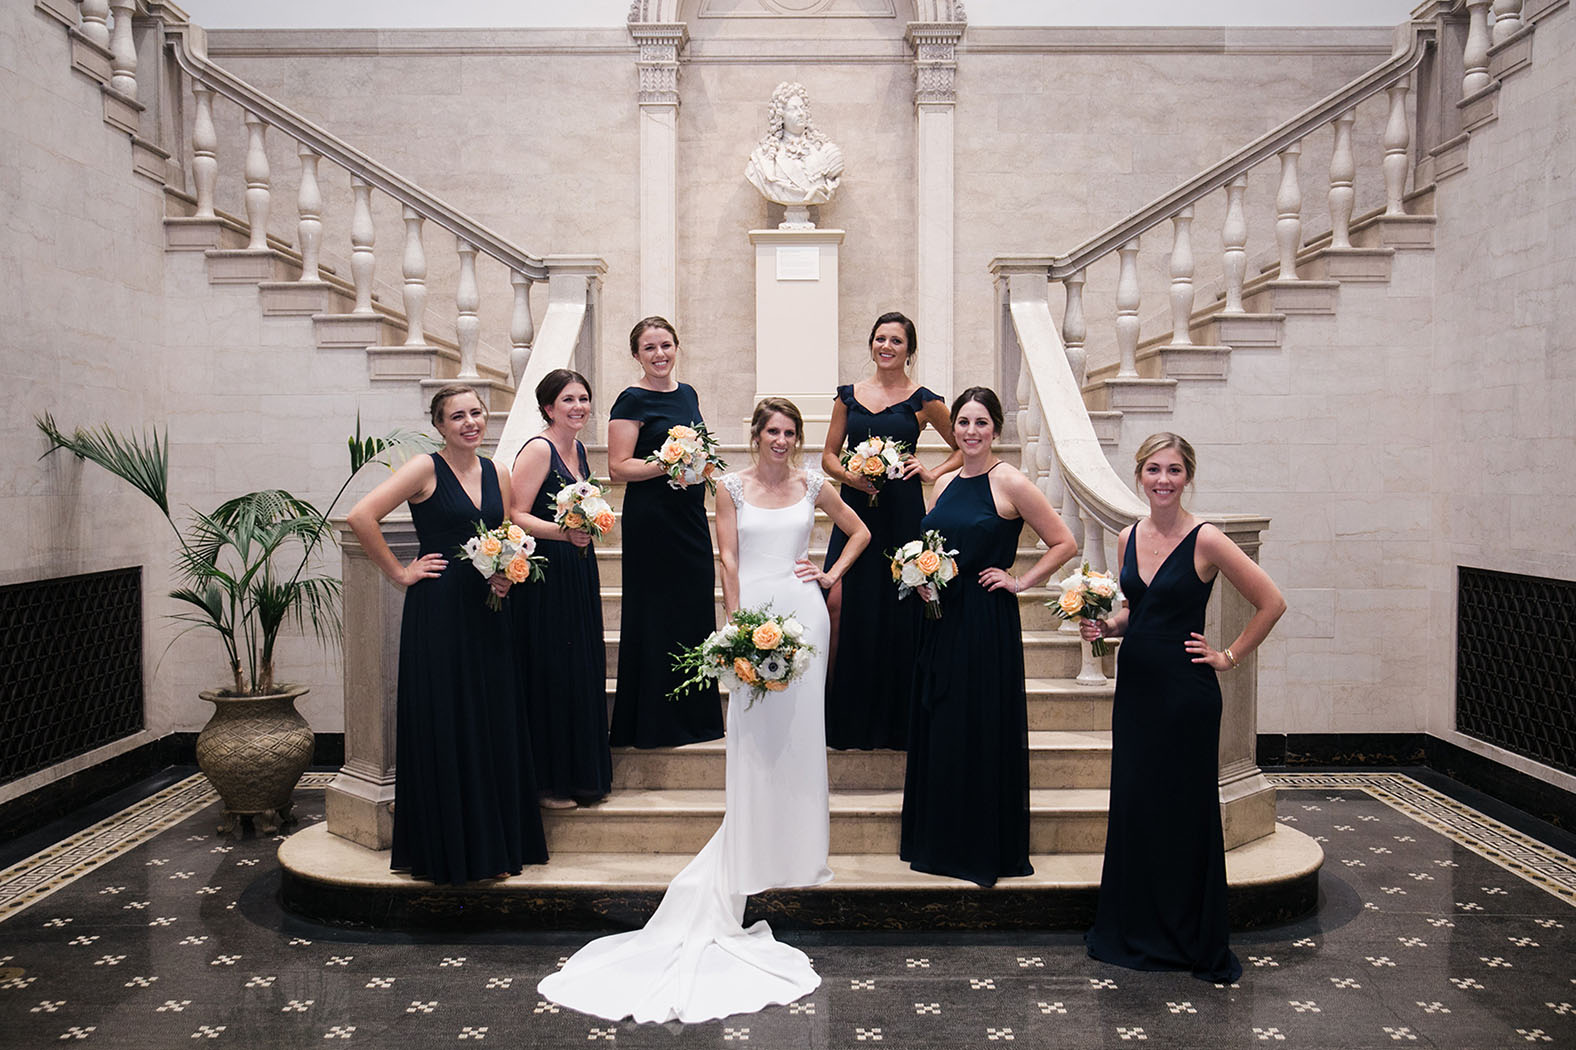 Becca and her Bridesmaids